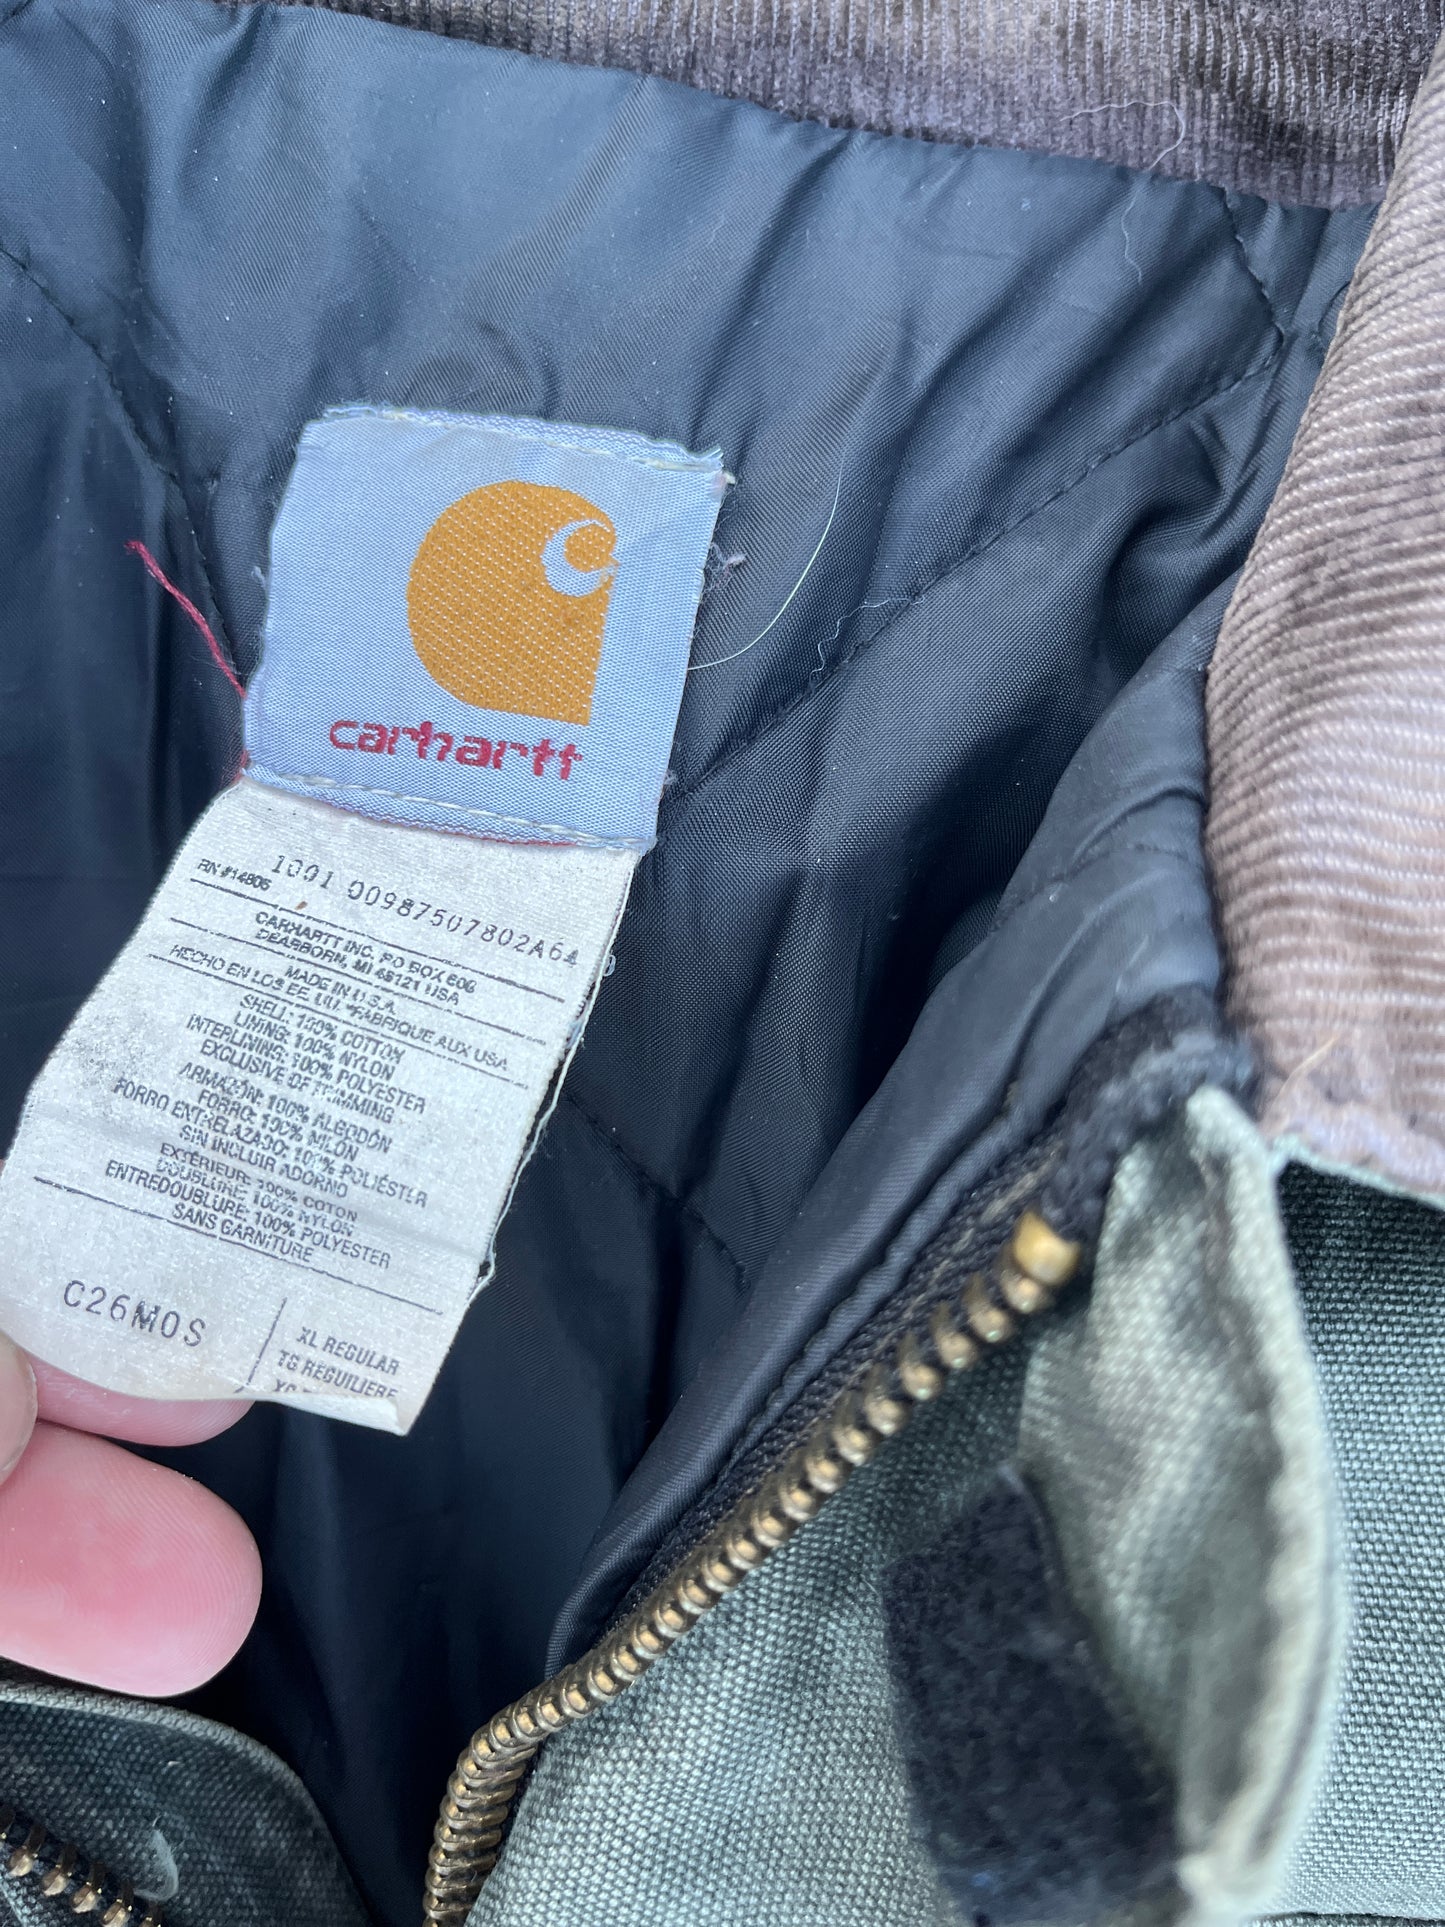 Faded Olive Green Carhartt Arctic Style Jacket - XL